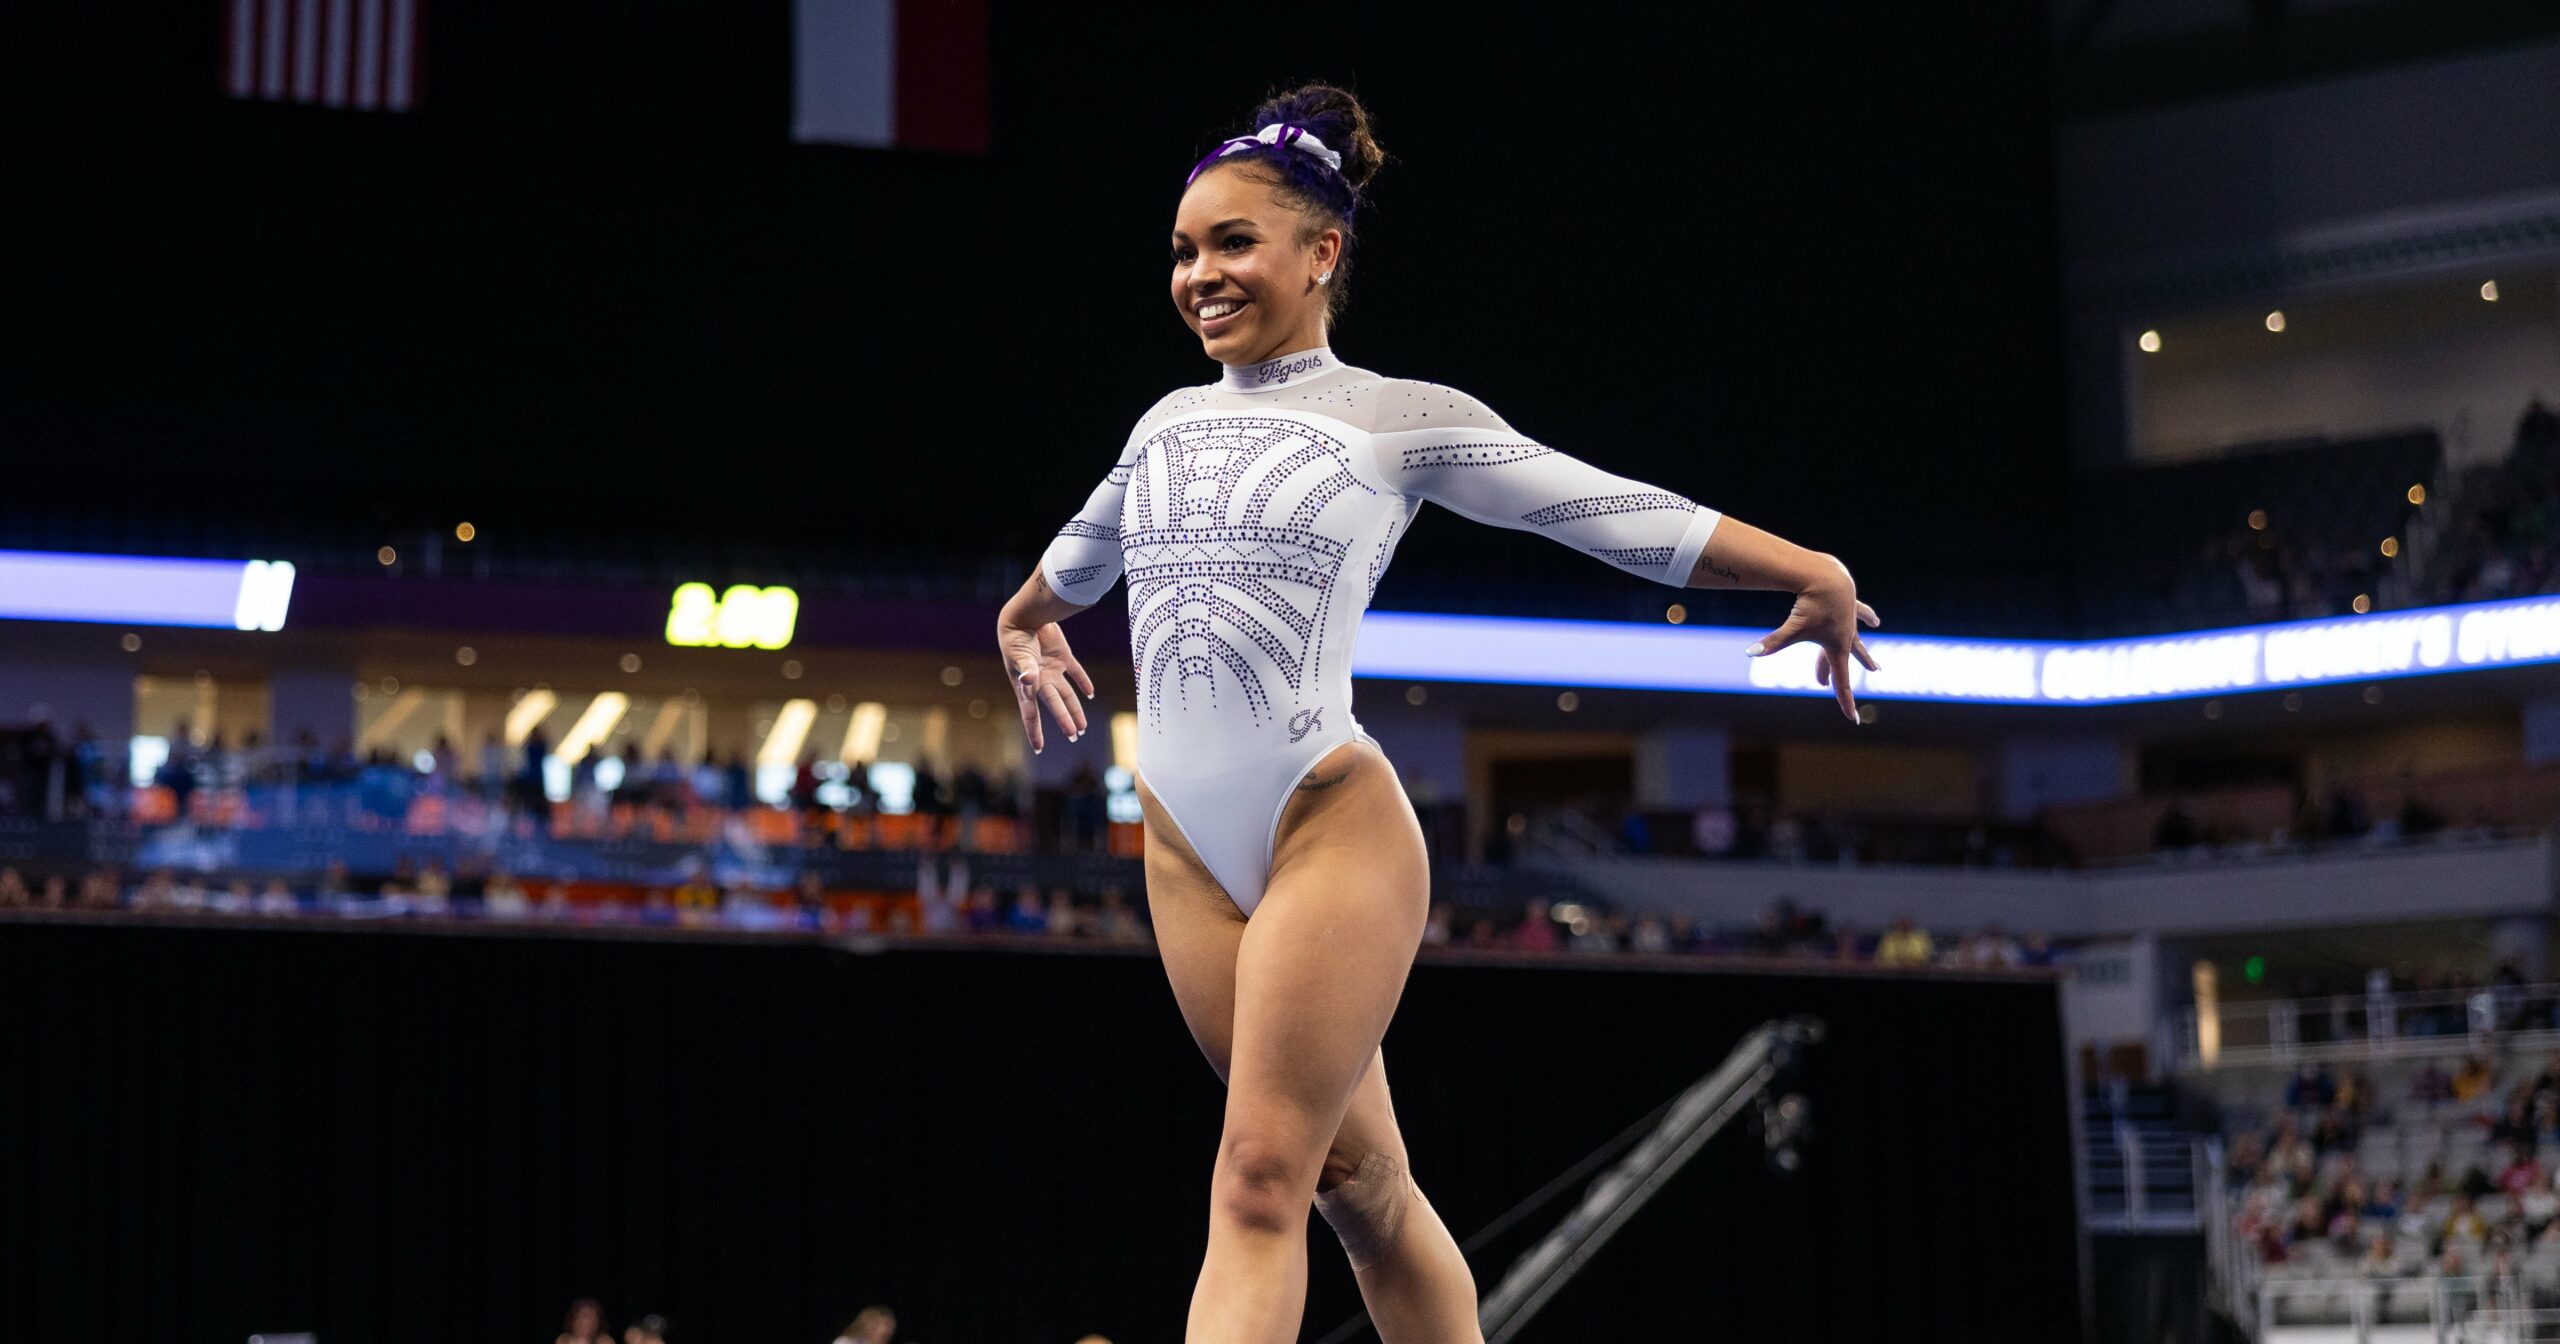 what’s-going-on-with-the-leotards-in-women’s-gymnastics?